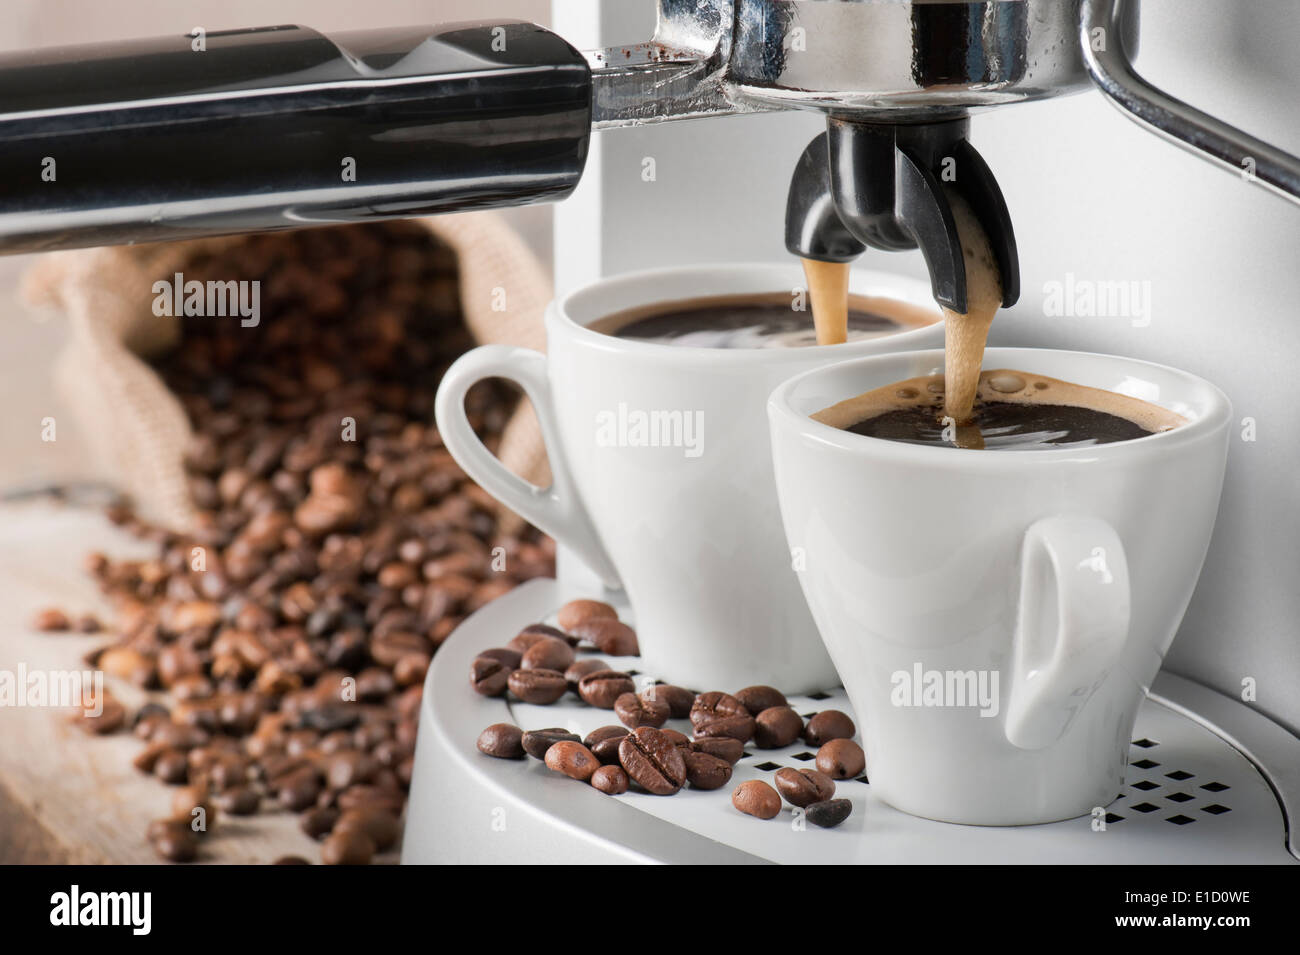 https://c8.alamy.com/comp/E1D0WE/coffee-machine-makes-two-coffee-with-coffee-beans-on-background-E1D0WE.jpg